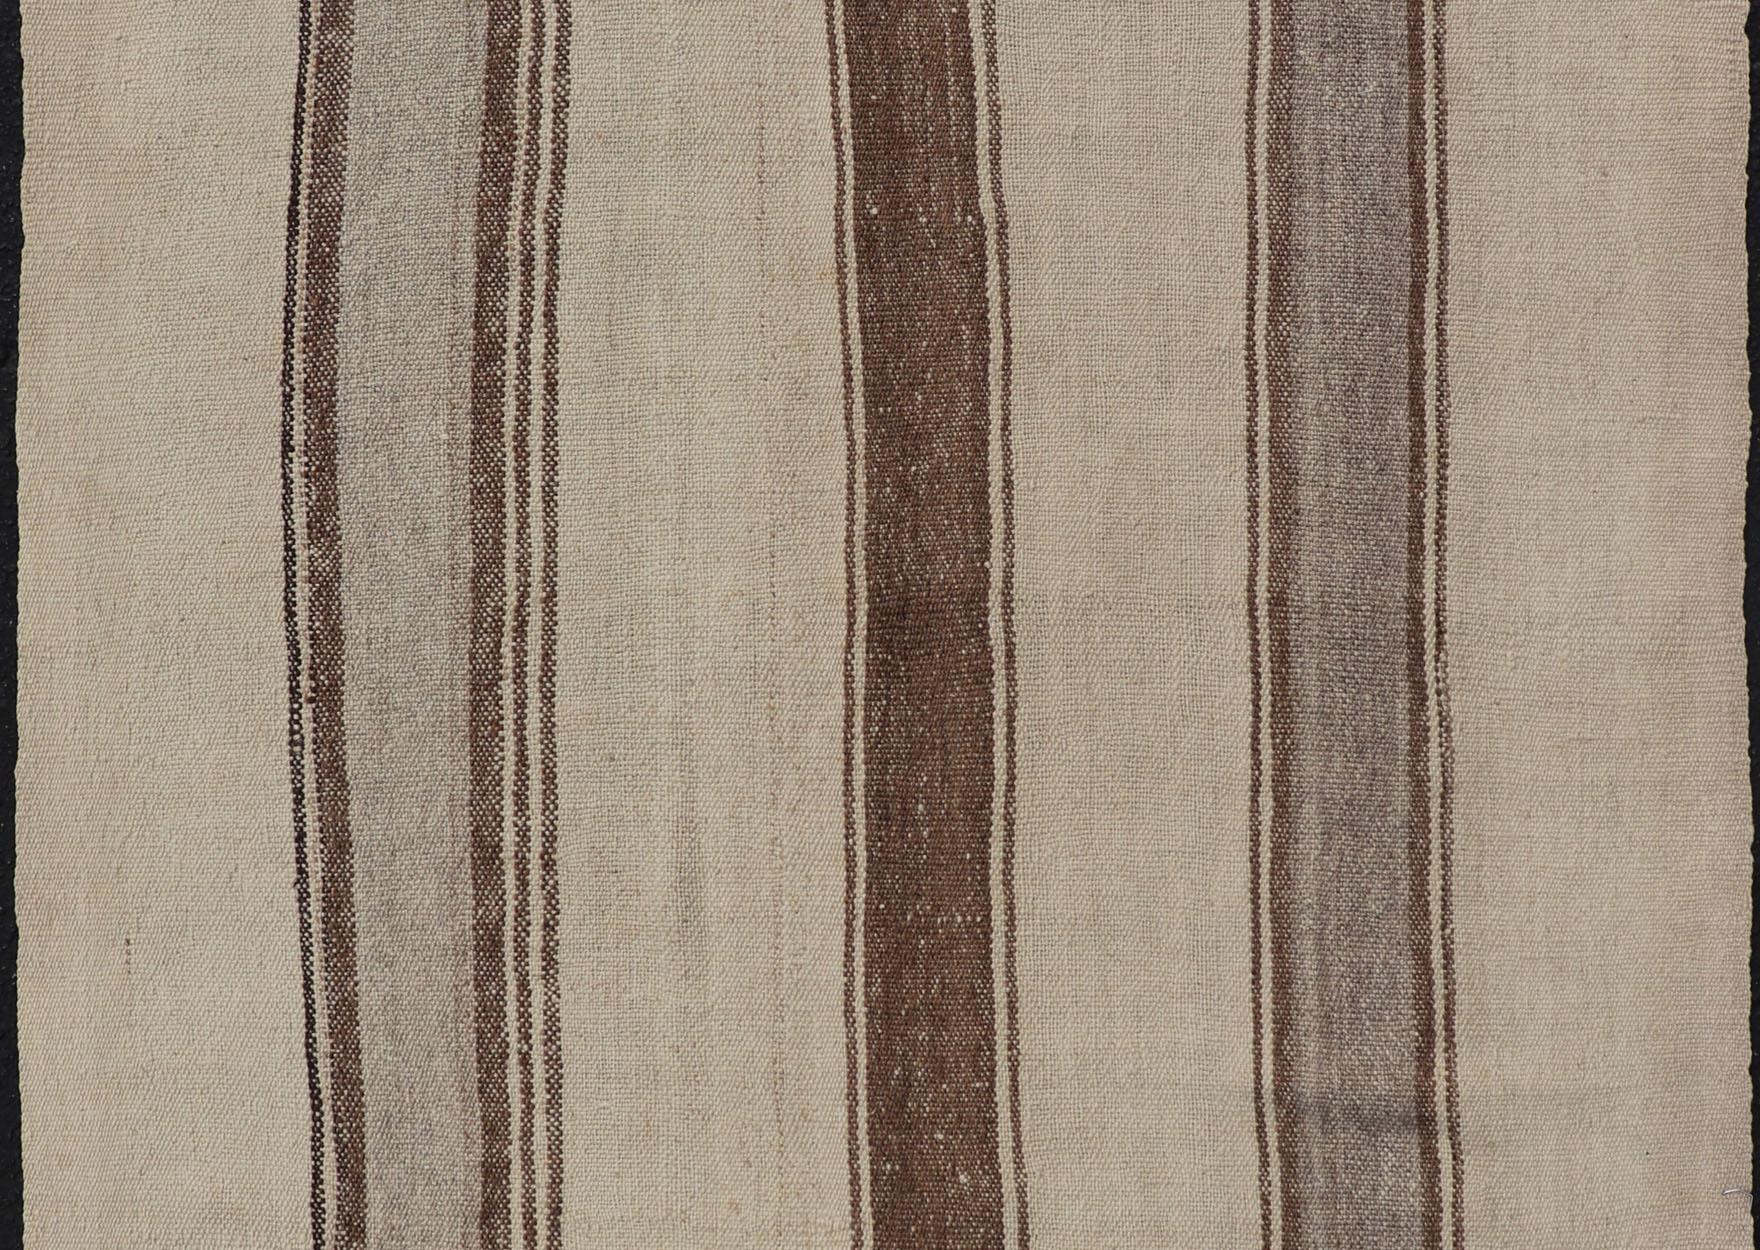 Vintage Turkish Kilim with Vertical Stripes in Tan, Taupe, Grey, Cream and Brown For Sale 3